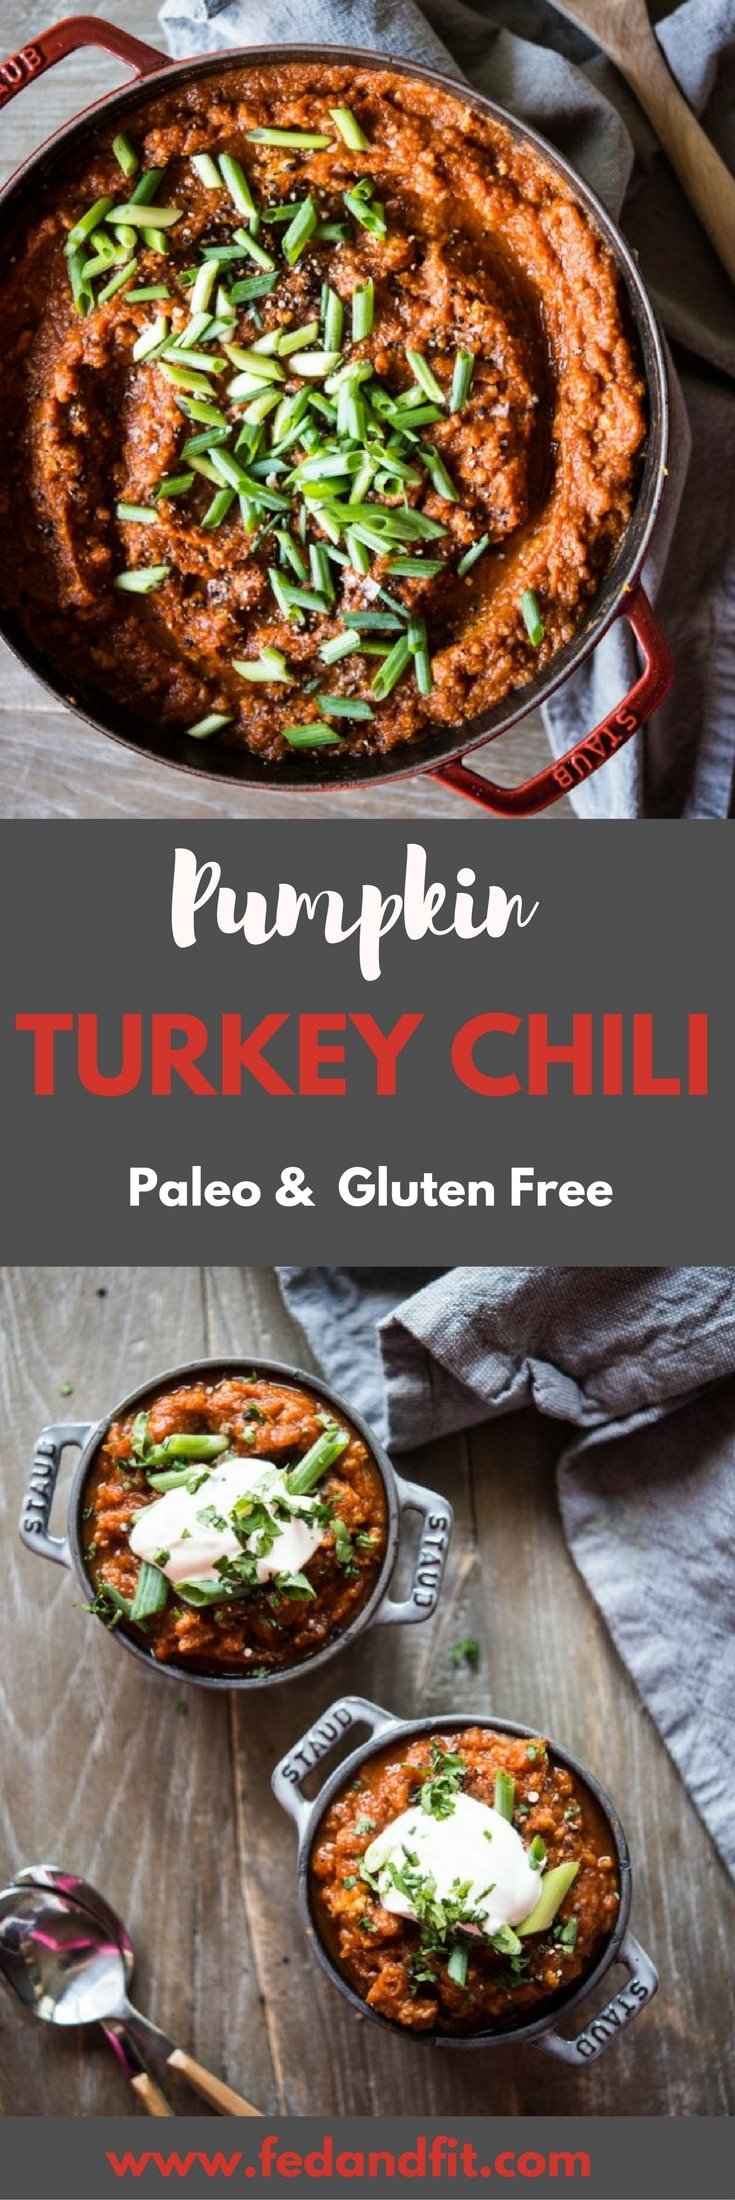 This Paleo Pumpkin Turkey Chili recipe is healthy, easy, and Whole30-friendly! It is the perfect fall meal to feed a huge crowd.